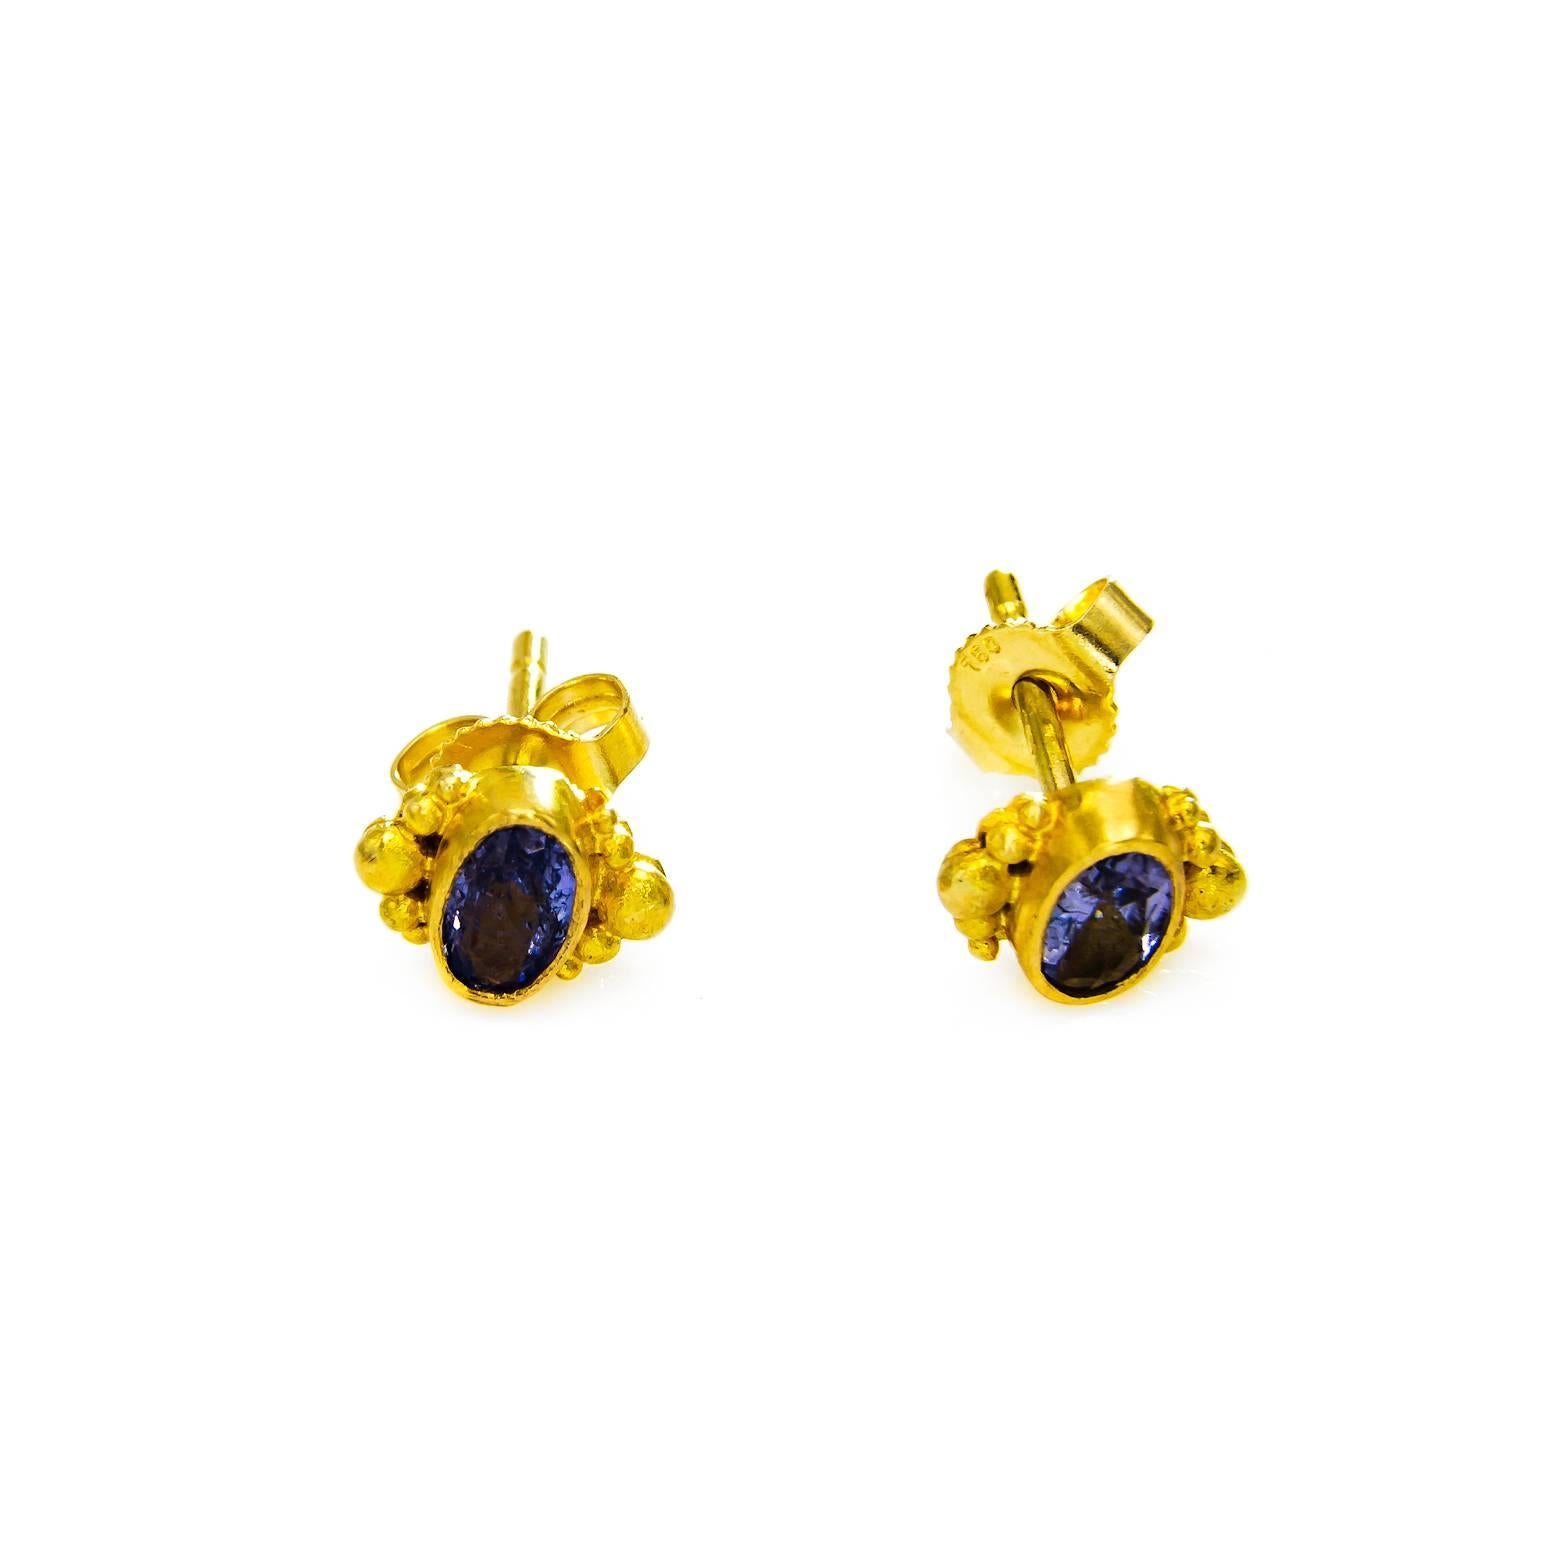 These artistic post beauties glow with rose cut indigo oval tanzanite embellished in gorgeous satin finished 18K yellow gold. Easy and comfortable to wear these post studs are stunning, elegant, and contemporary.